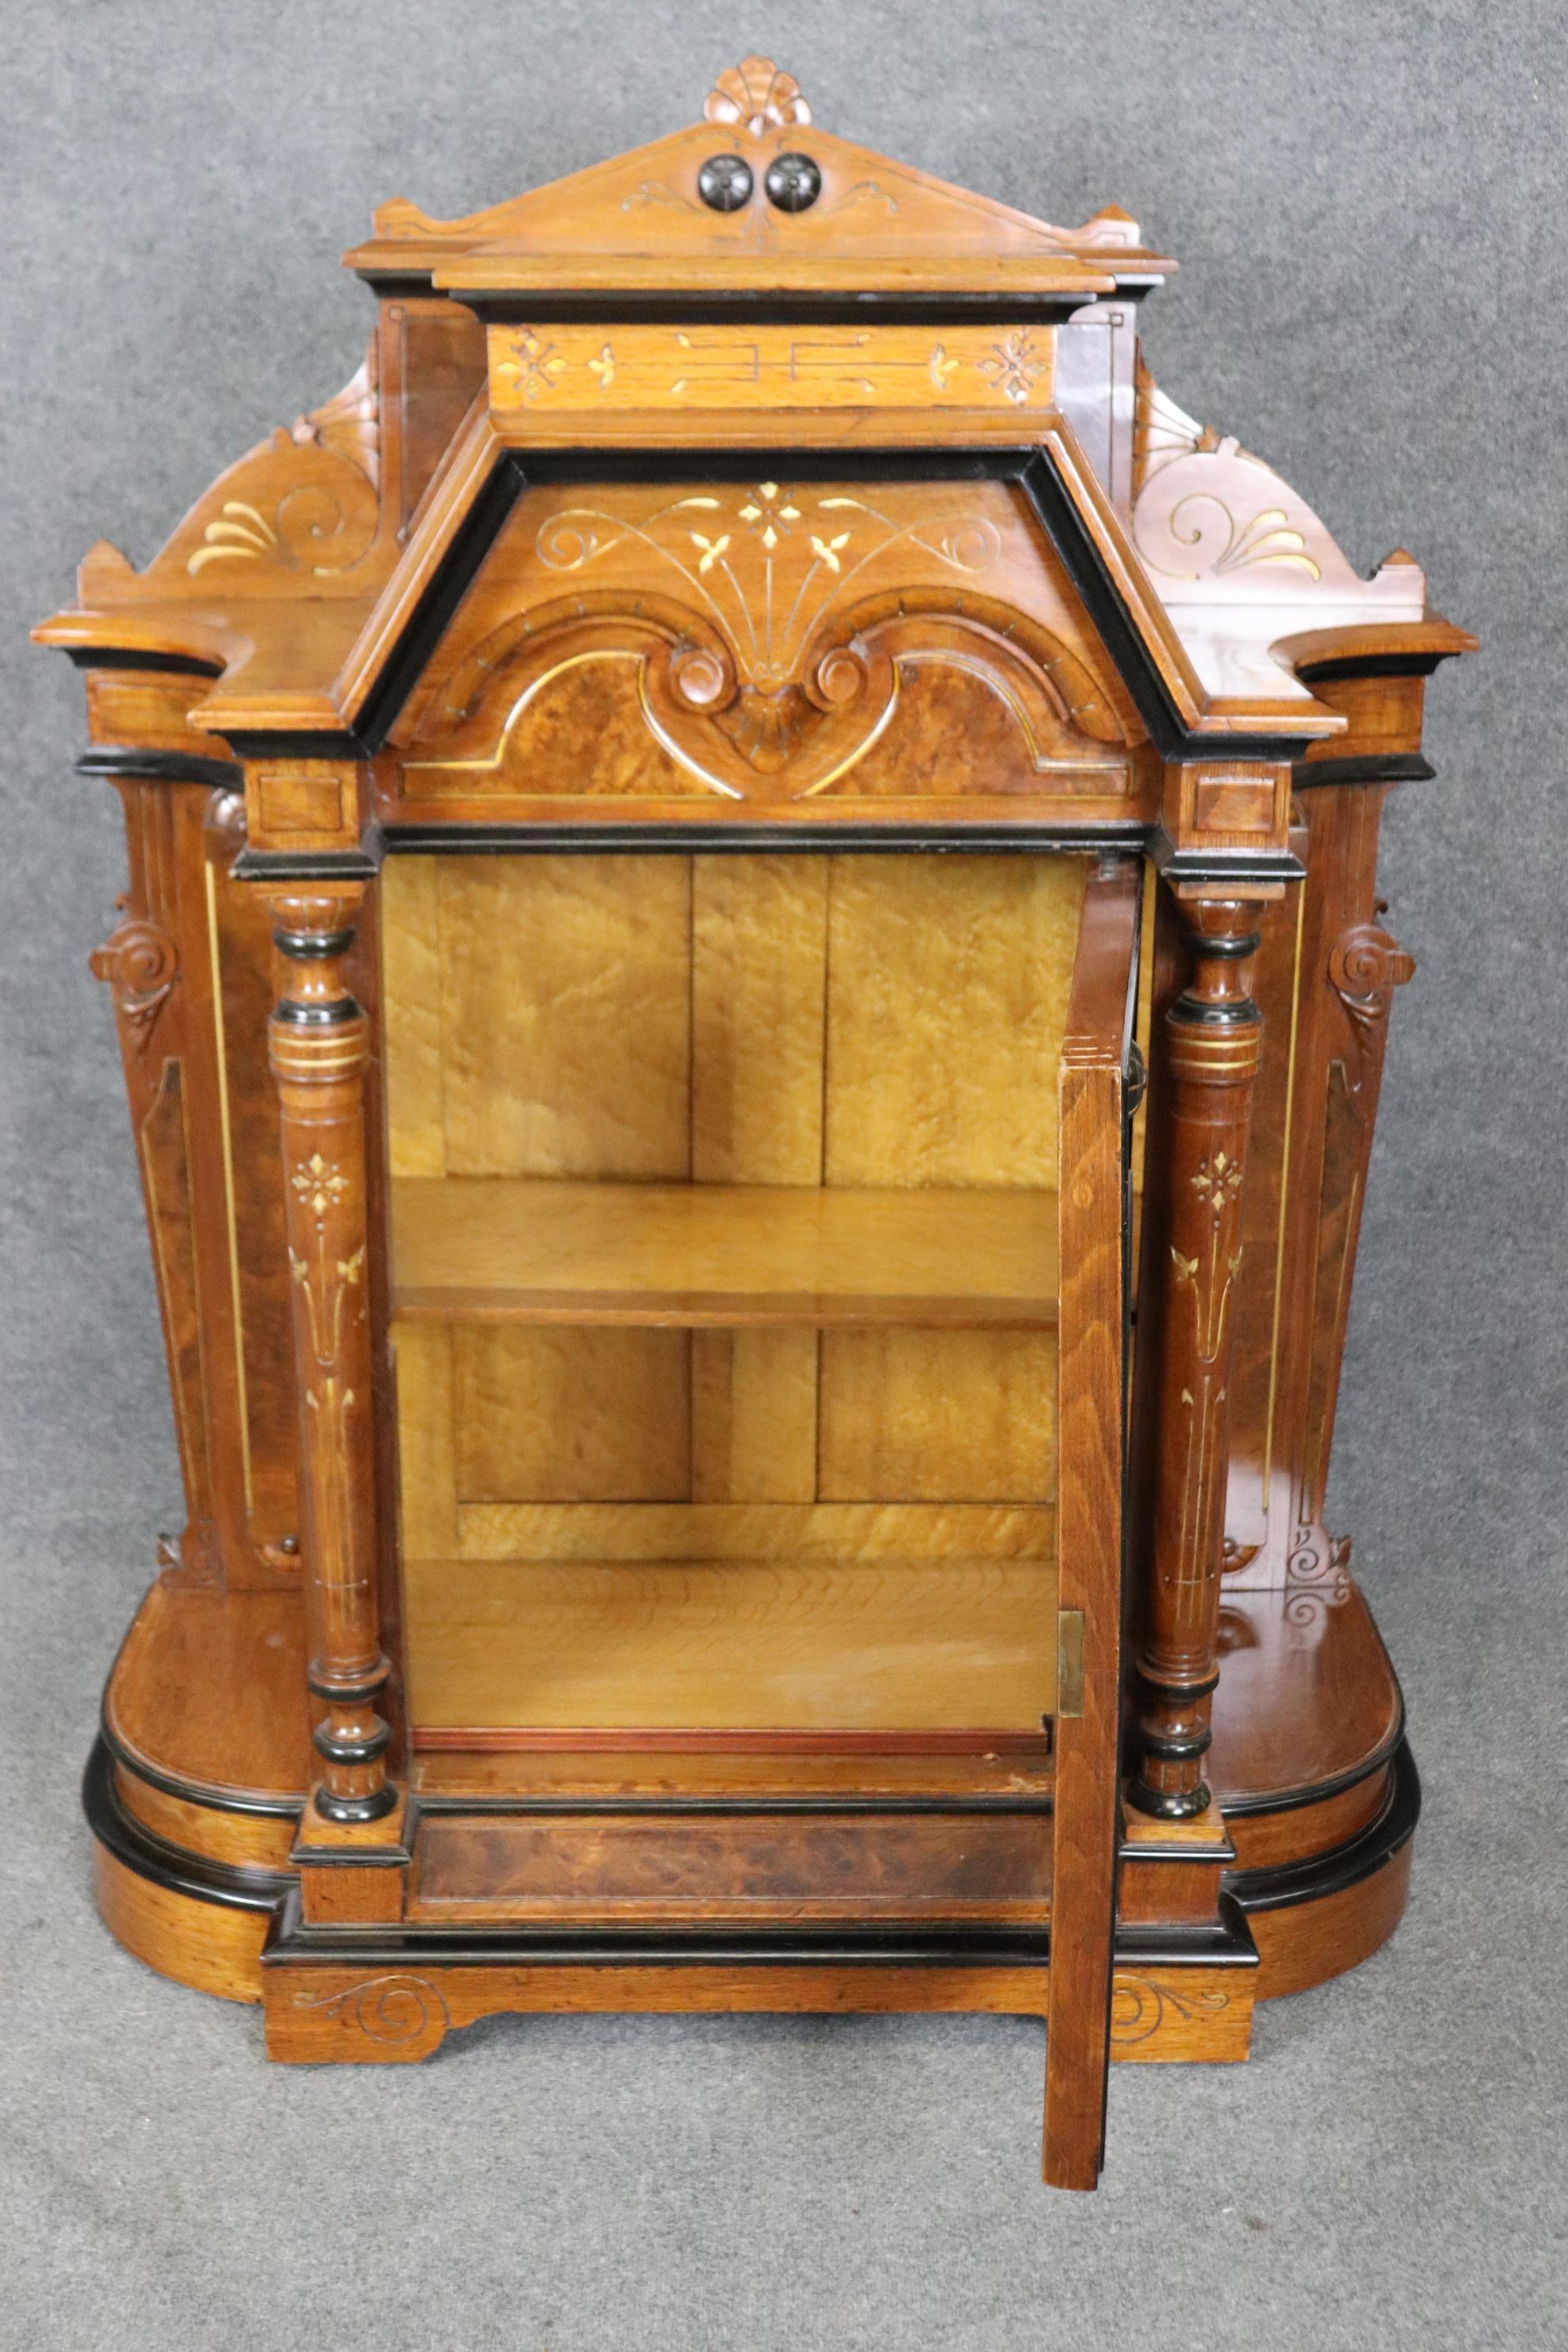 Rare Pair of American Renaissance Revival American Victorian Pedestal Cabinets  In Good Condition For Sale In Swedesboro, NJ